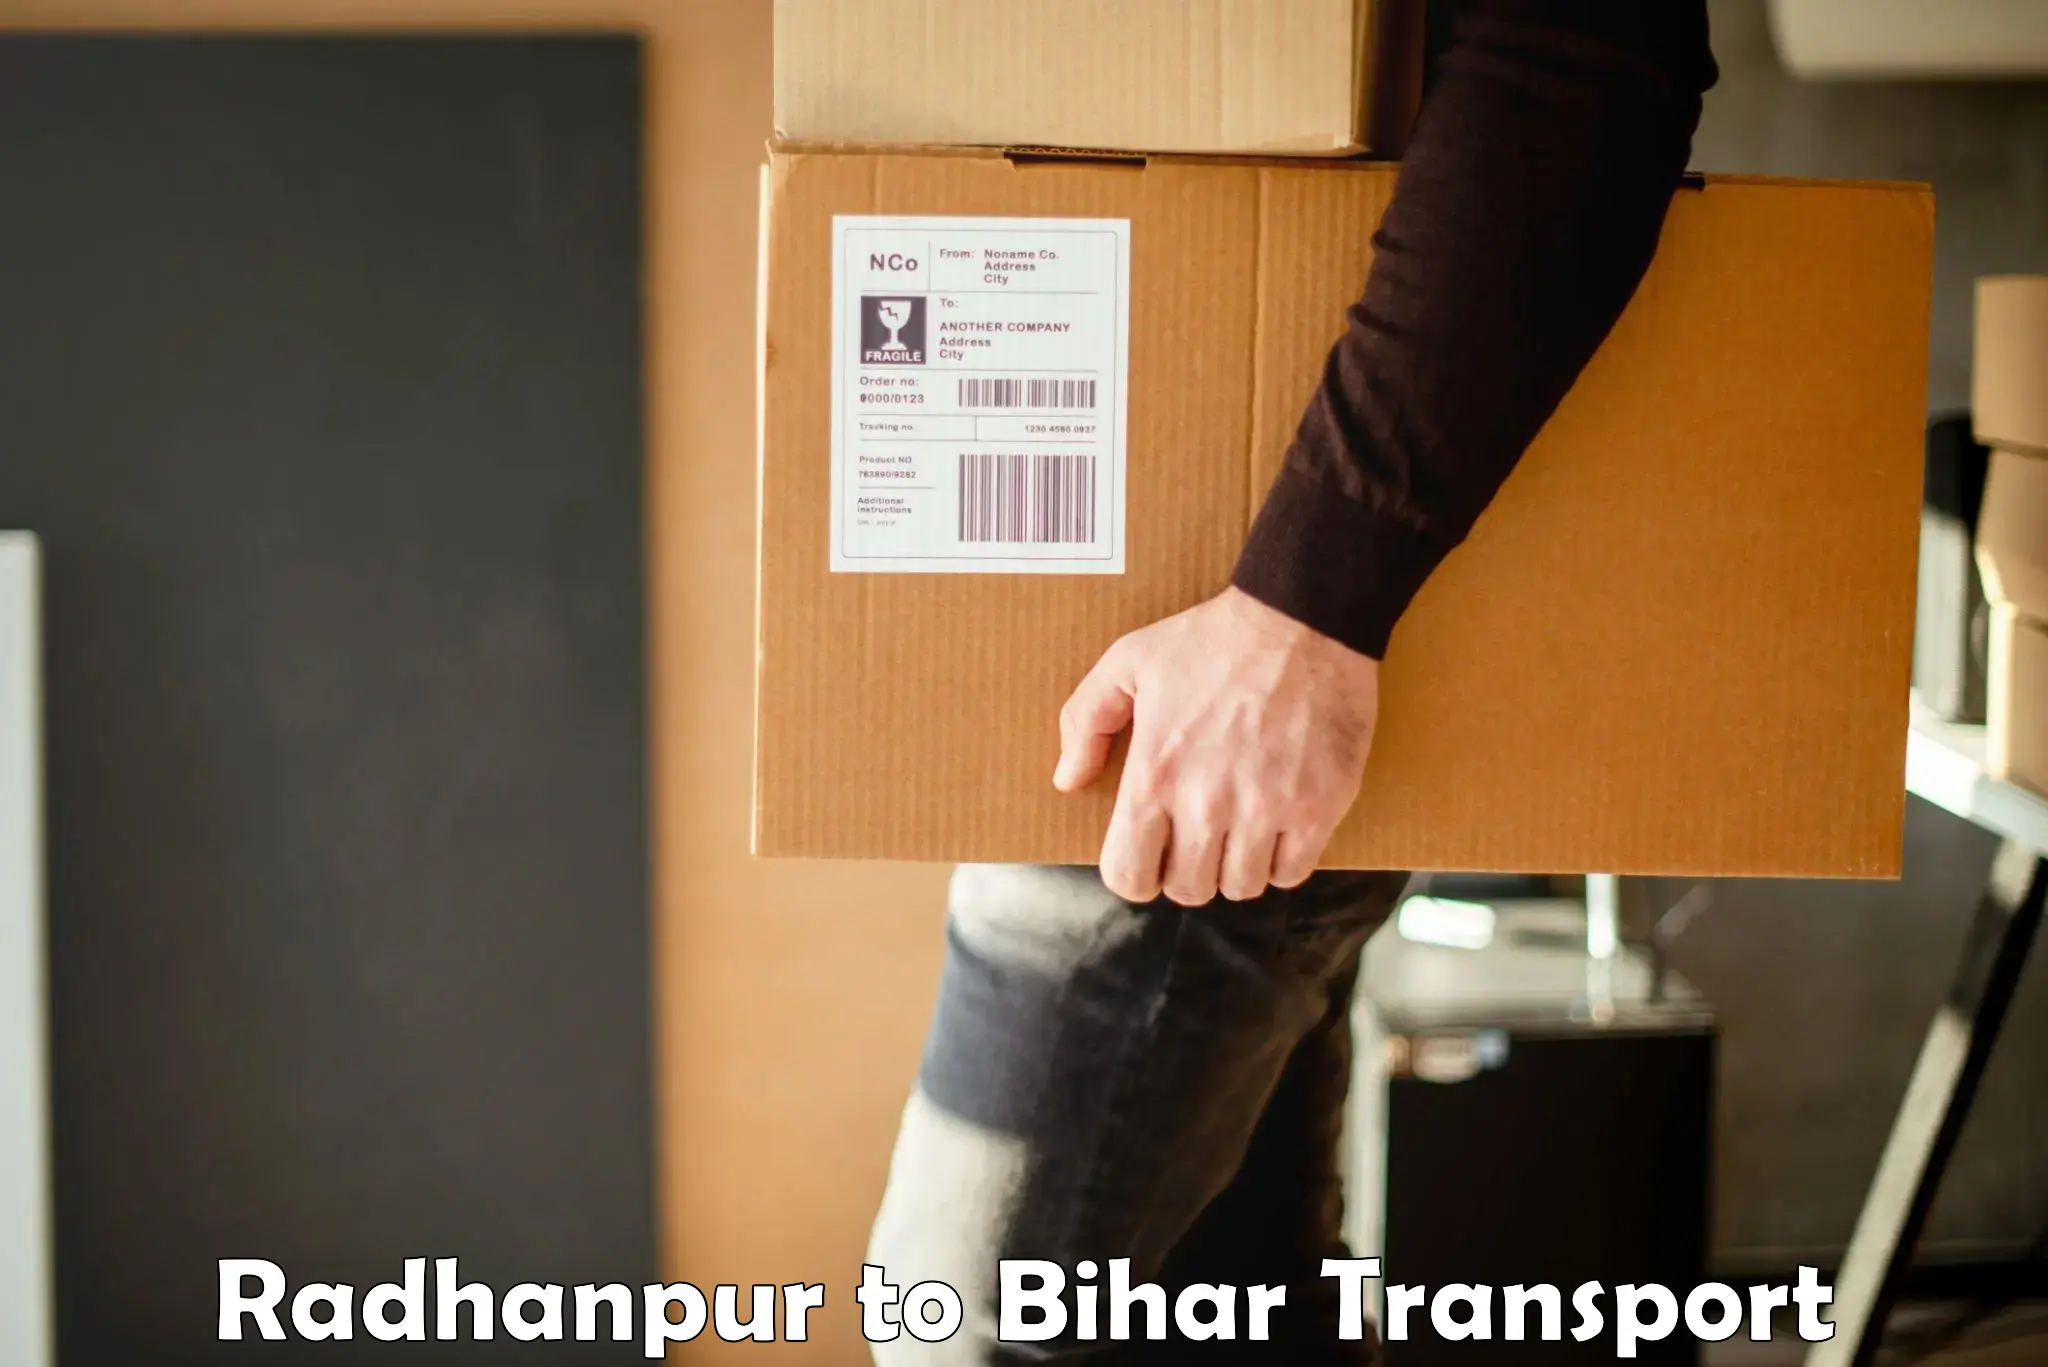 Air freight transport services in Radhanpur to Banmankhi Bazar